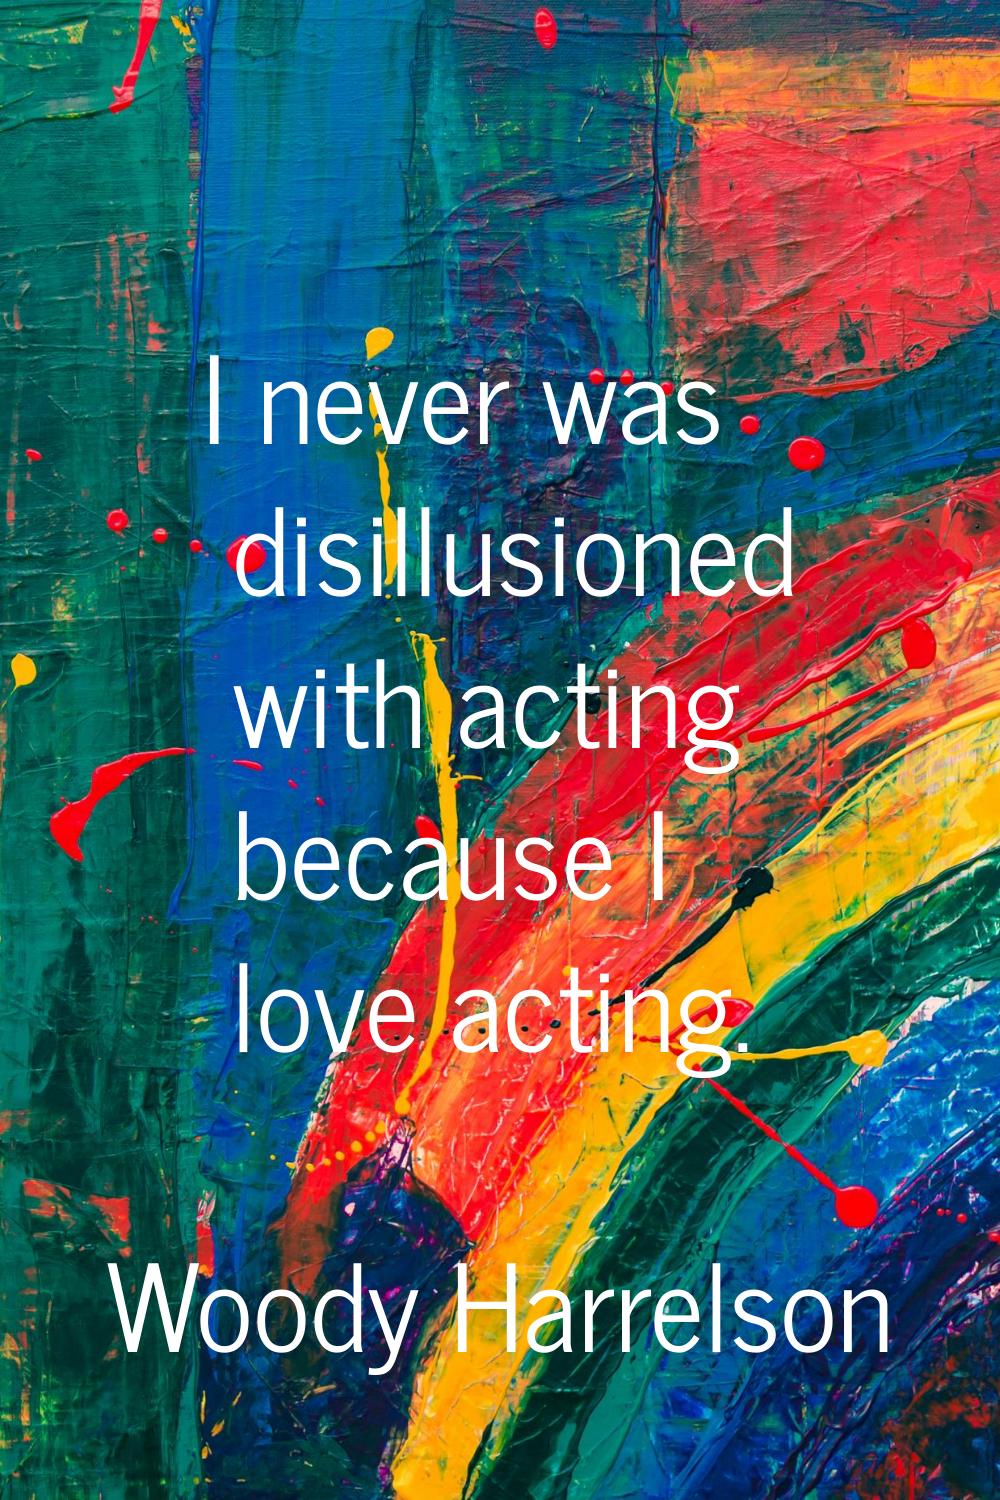 I never was disillusioned with acting because I love acting.